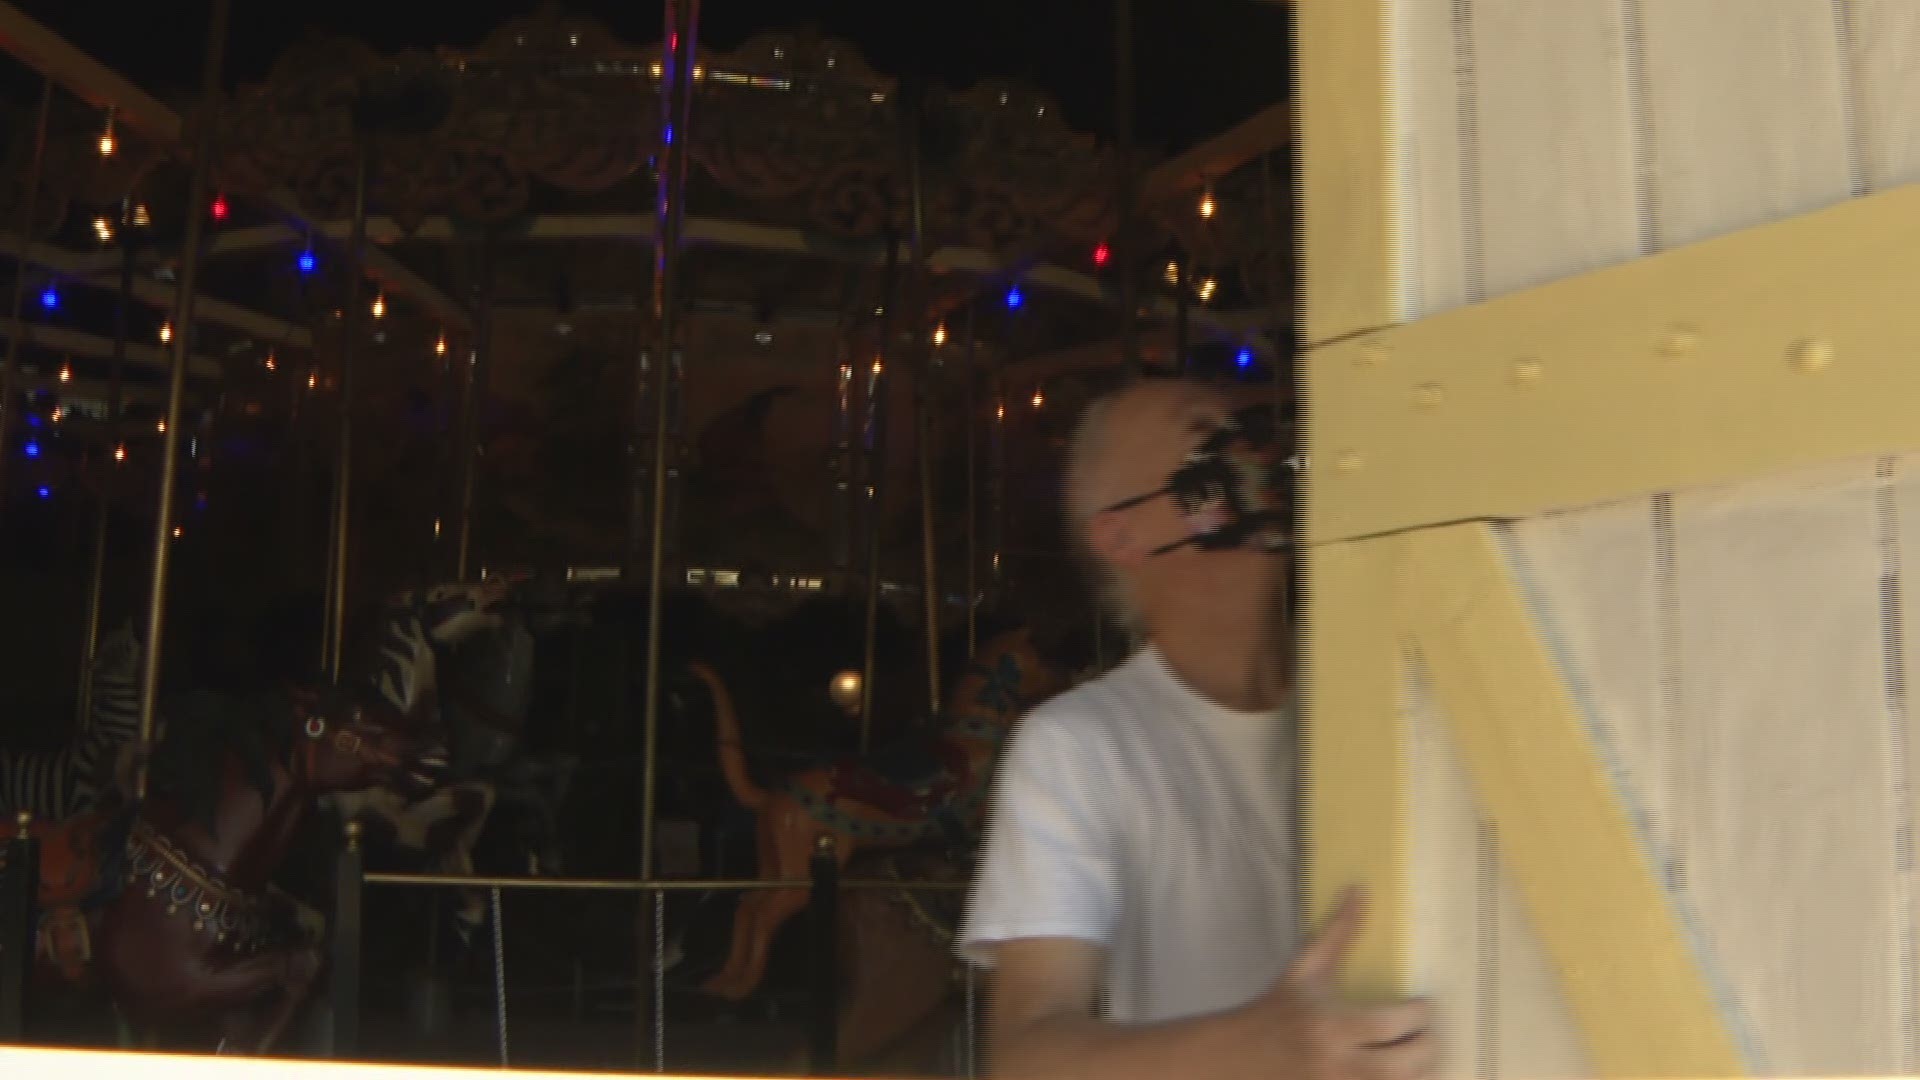 We ride Balboa Park's classic carousel and meet the wonderful people who keep San Diego's most famous ride spinning.